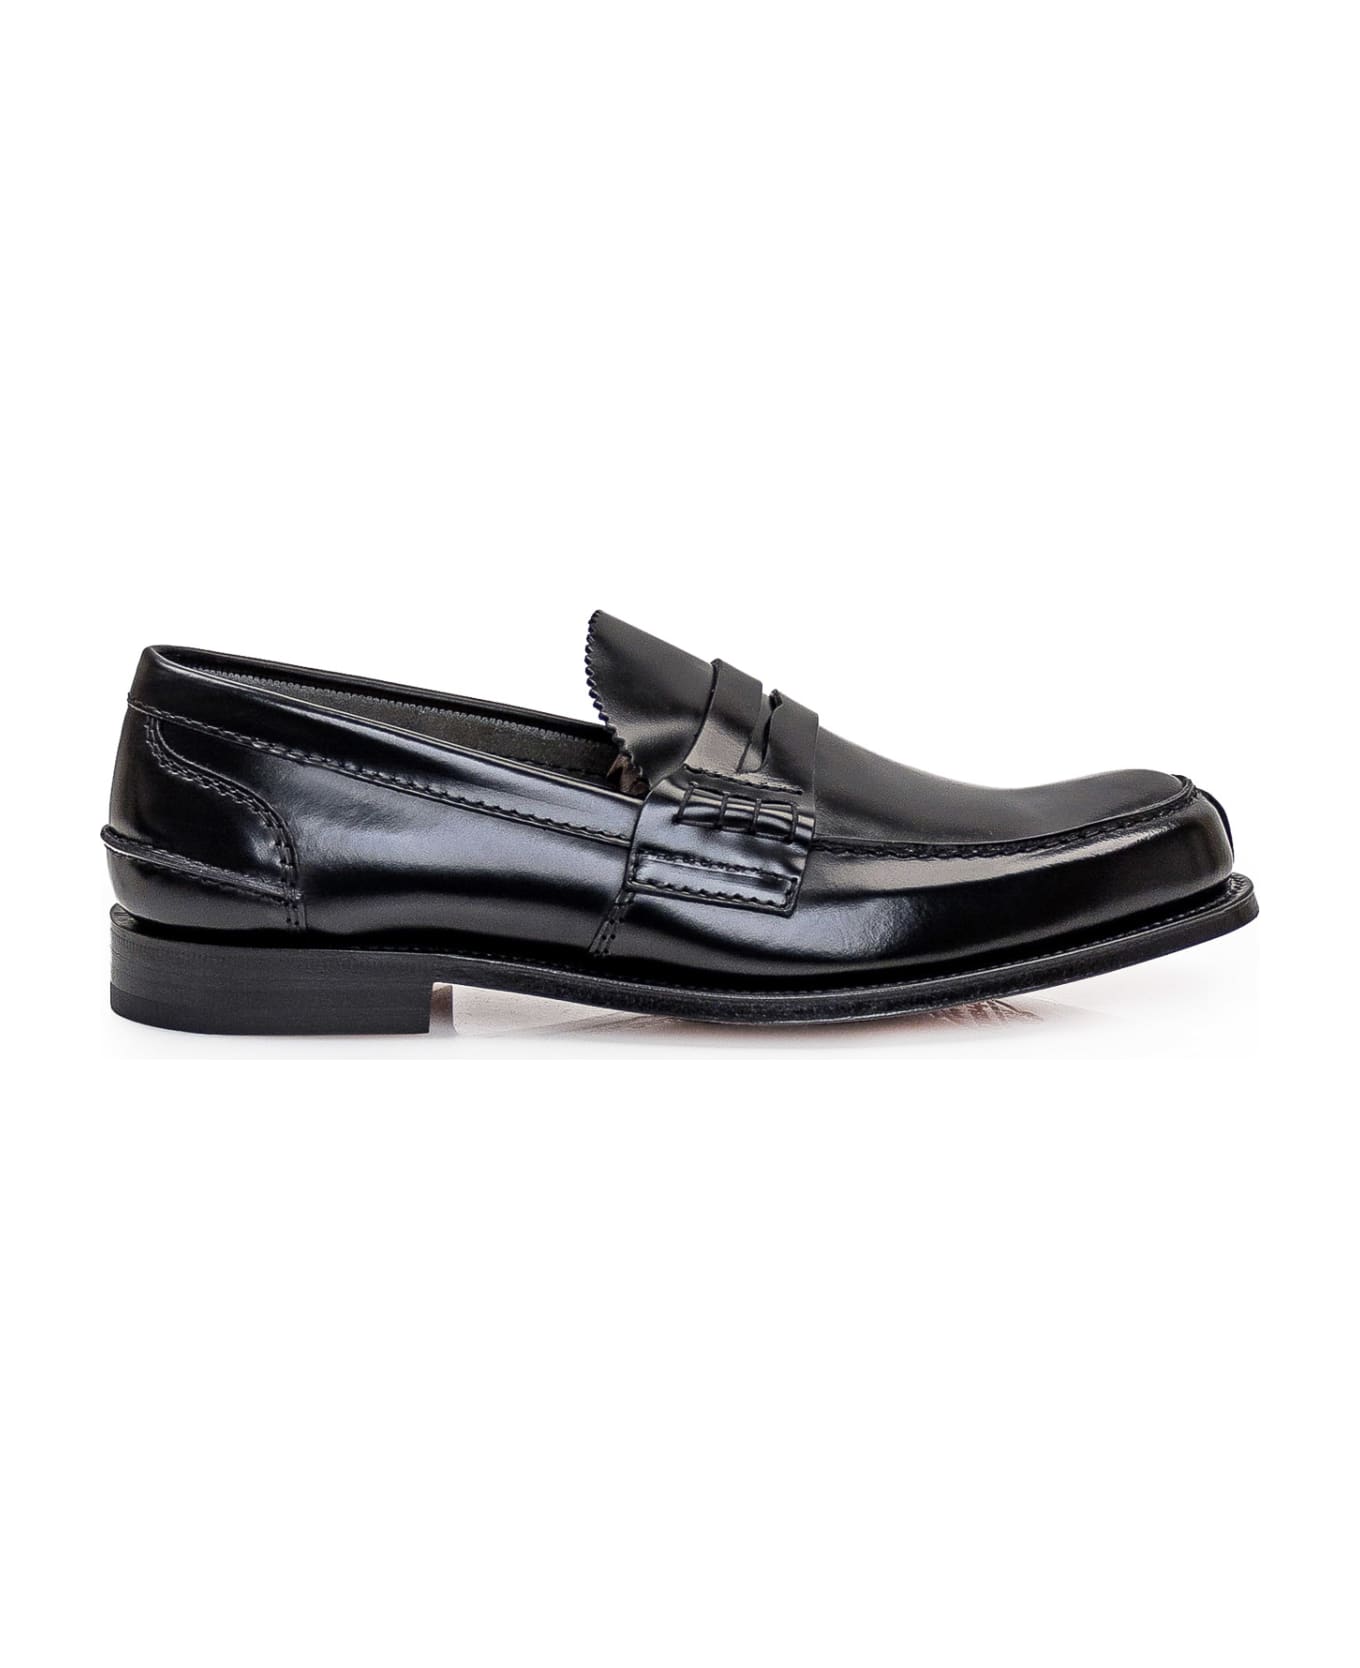 Church's Leather Loafer - BLACK ローファー＆デッキシューズ